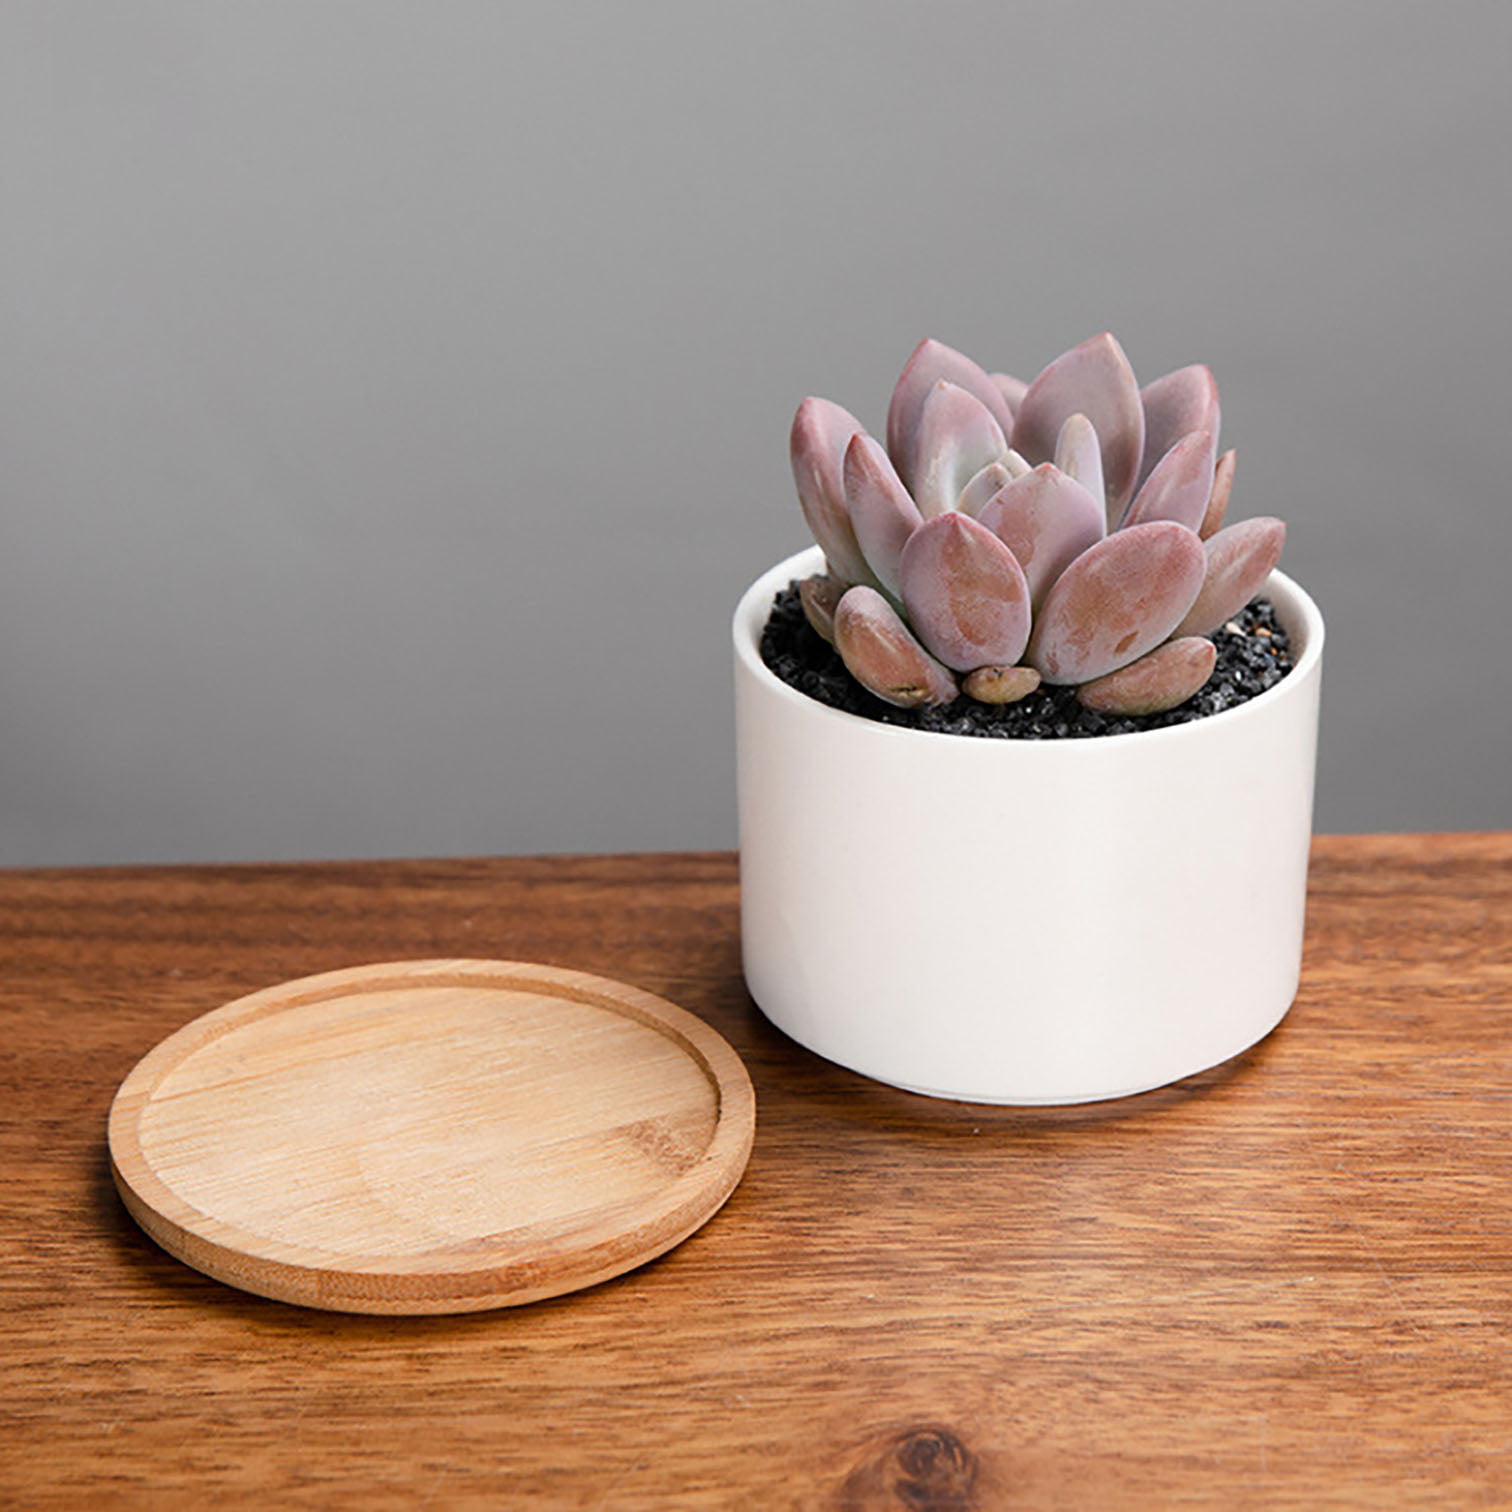 Succulent Pots, White Mini Ceramic Flower Planter Pot with Bamboo Tray - Plants Not Included, Size: 7*4cm